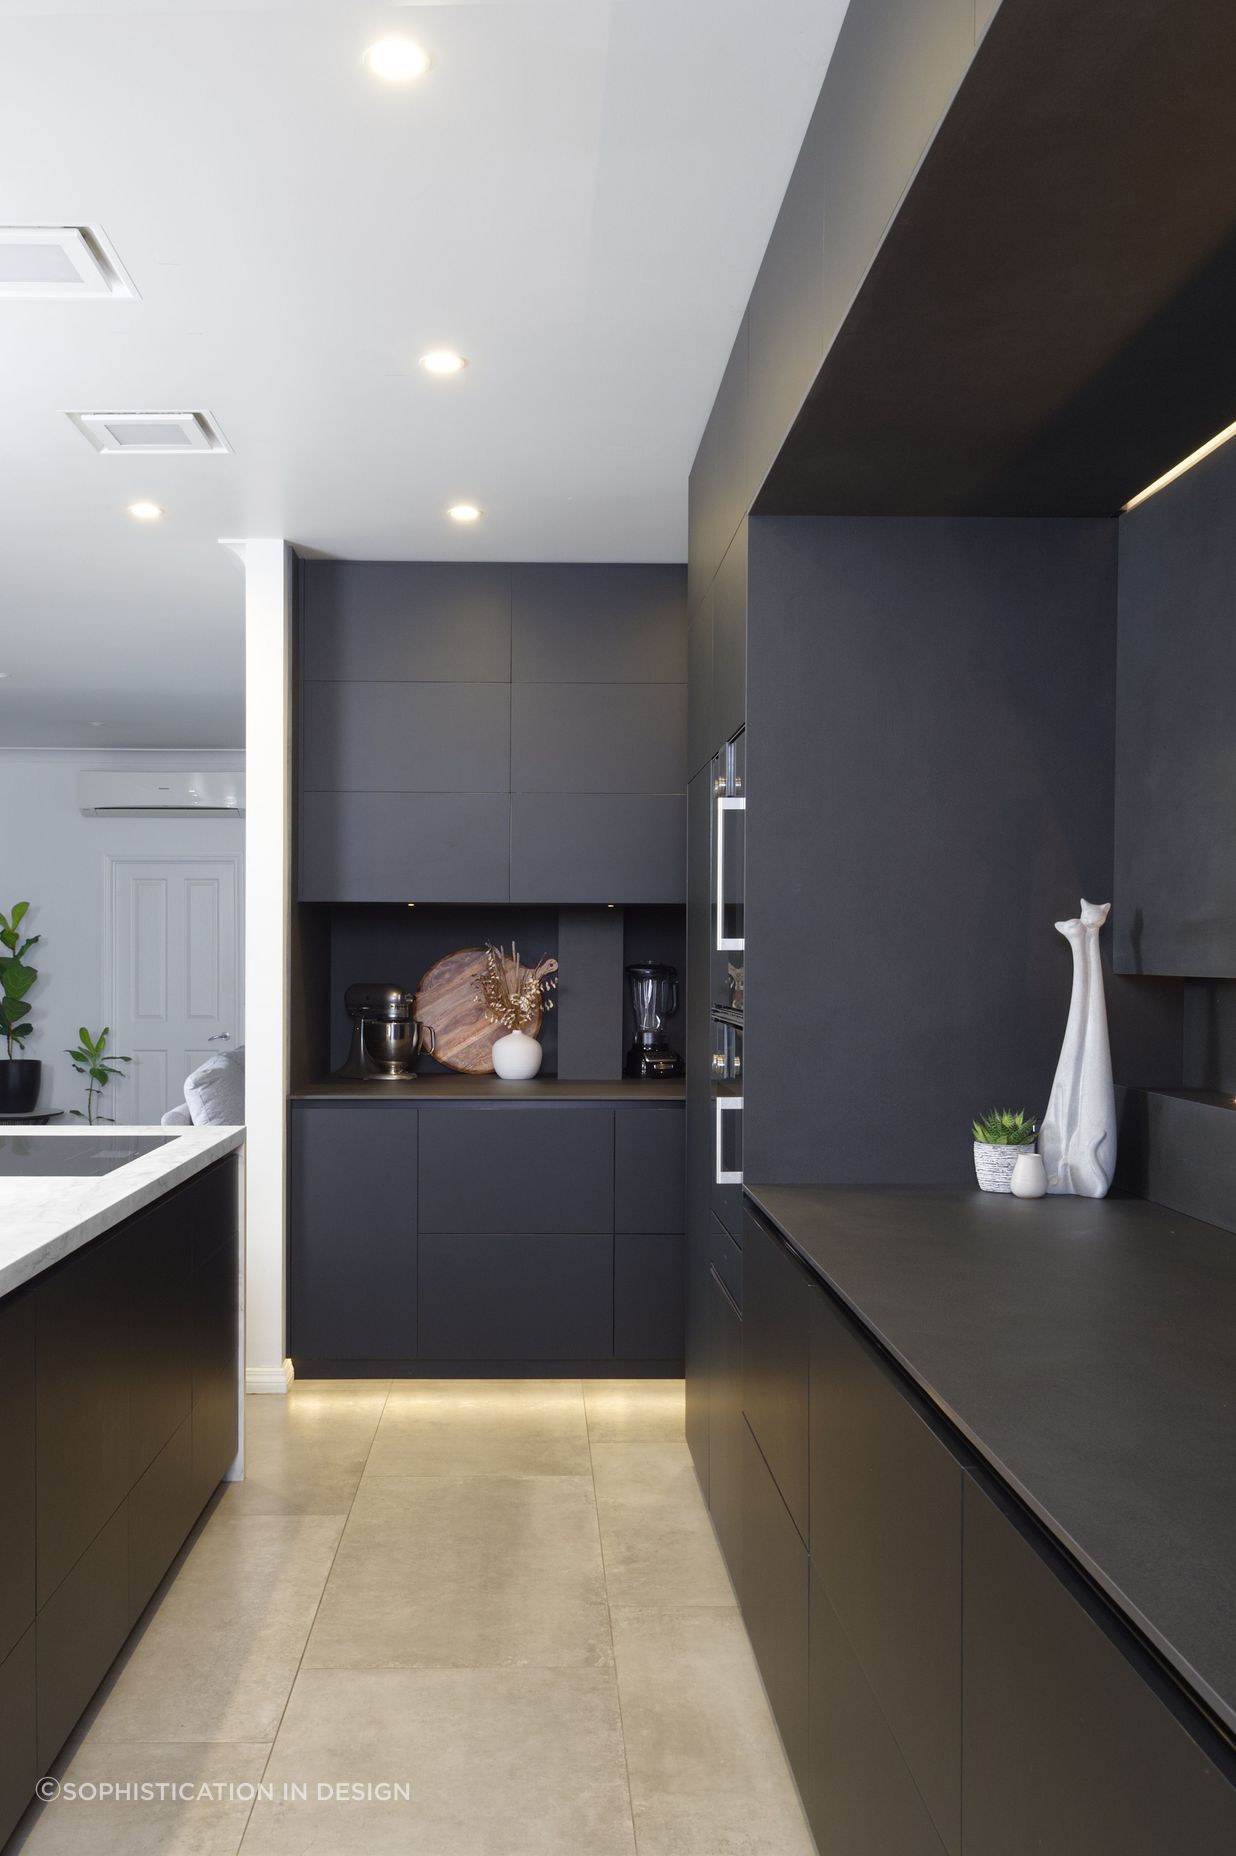 Matte black cabinetry adds a sophisticated feel.